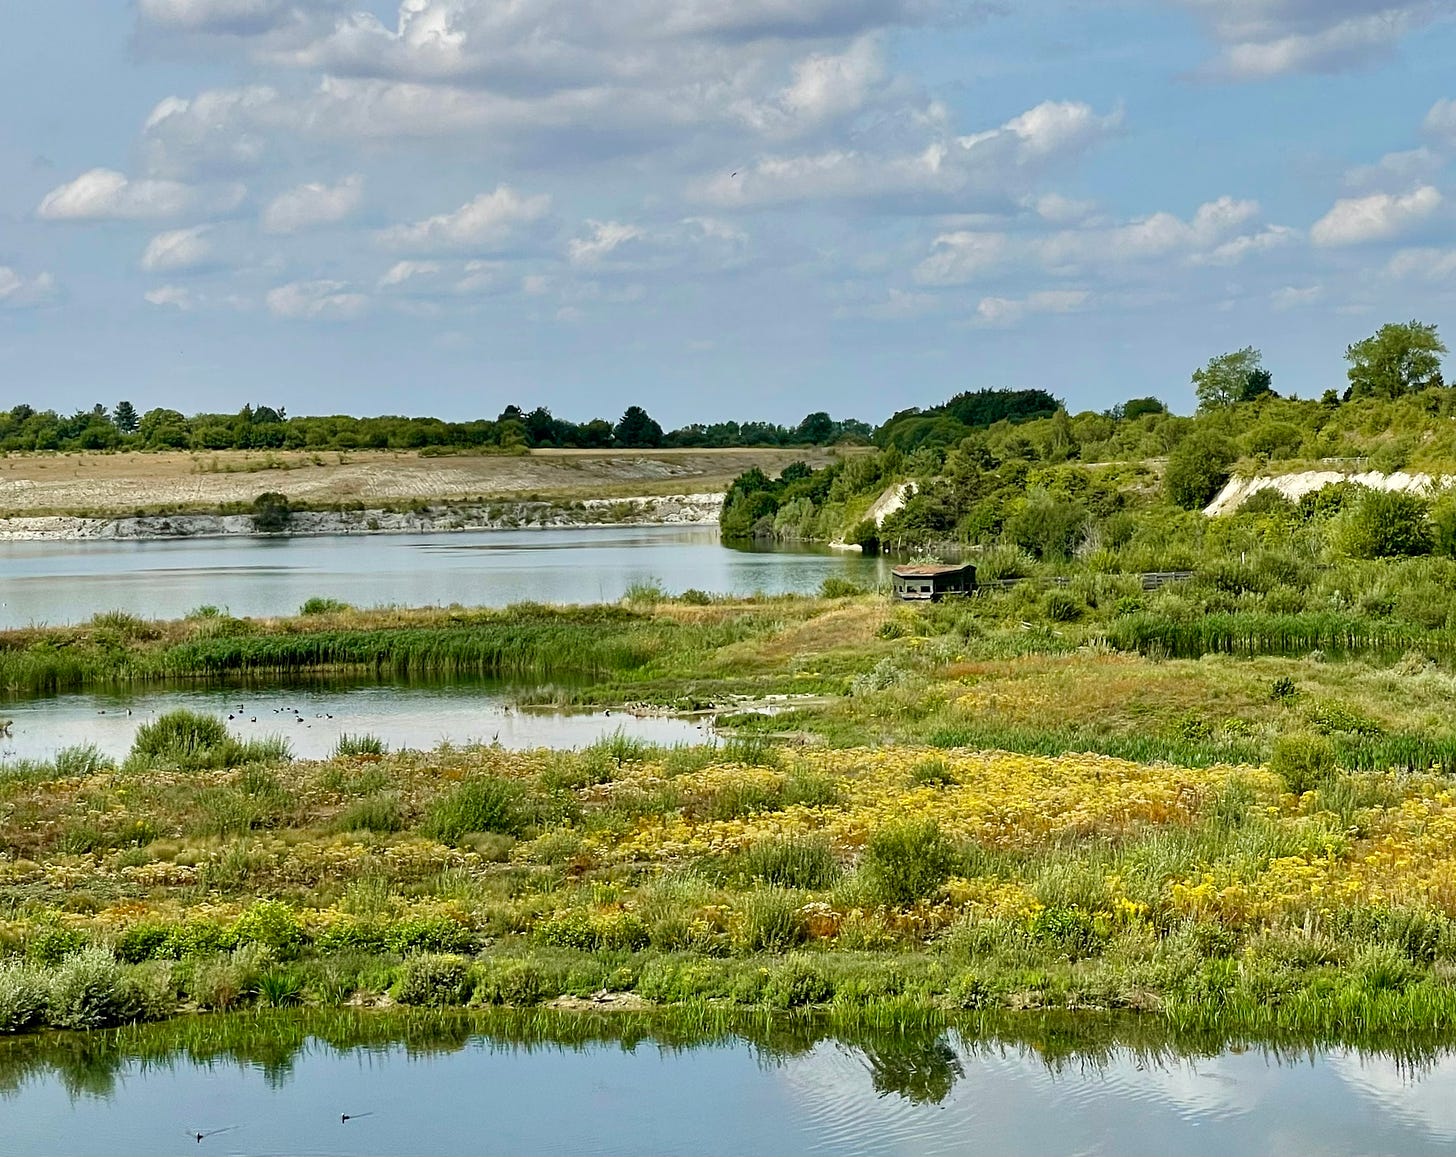 The view west towards the octagon bird hide